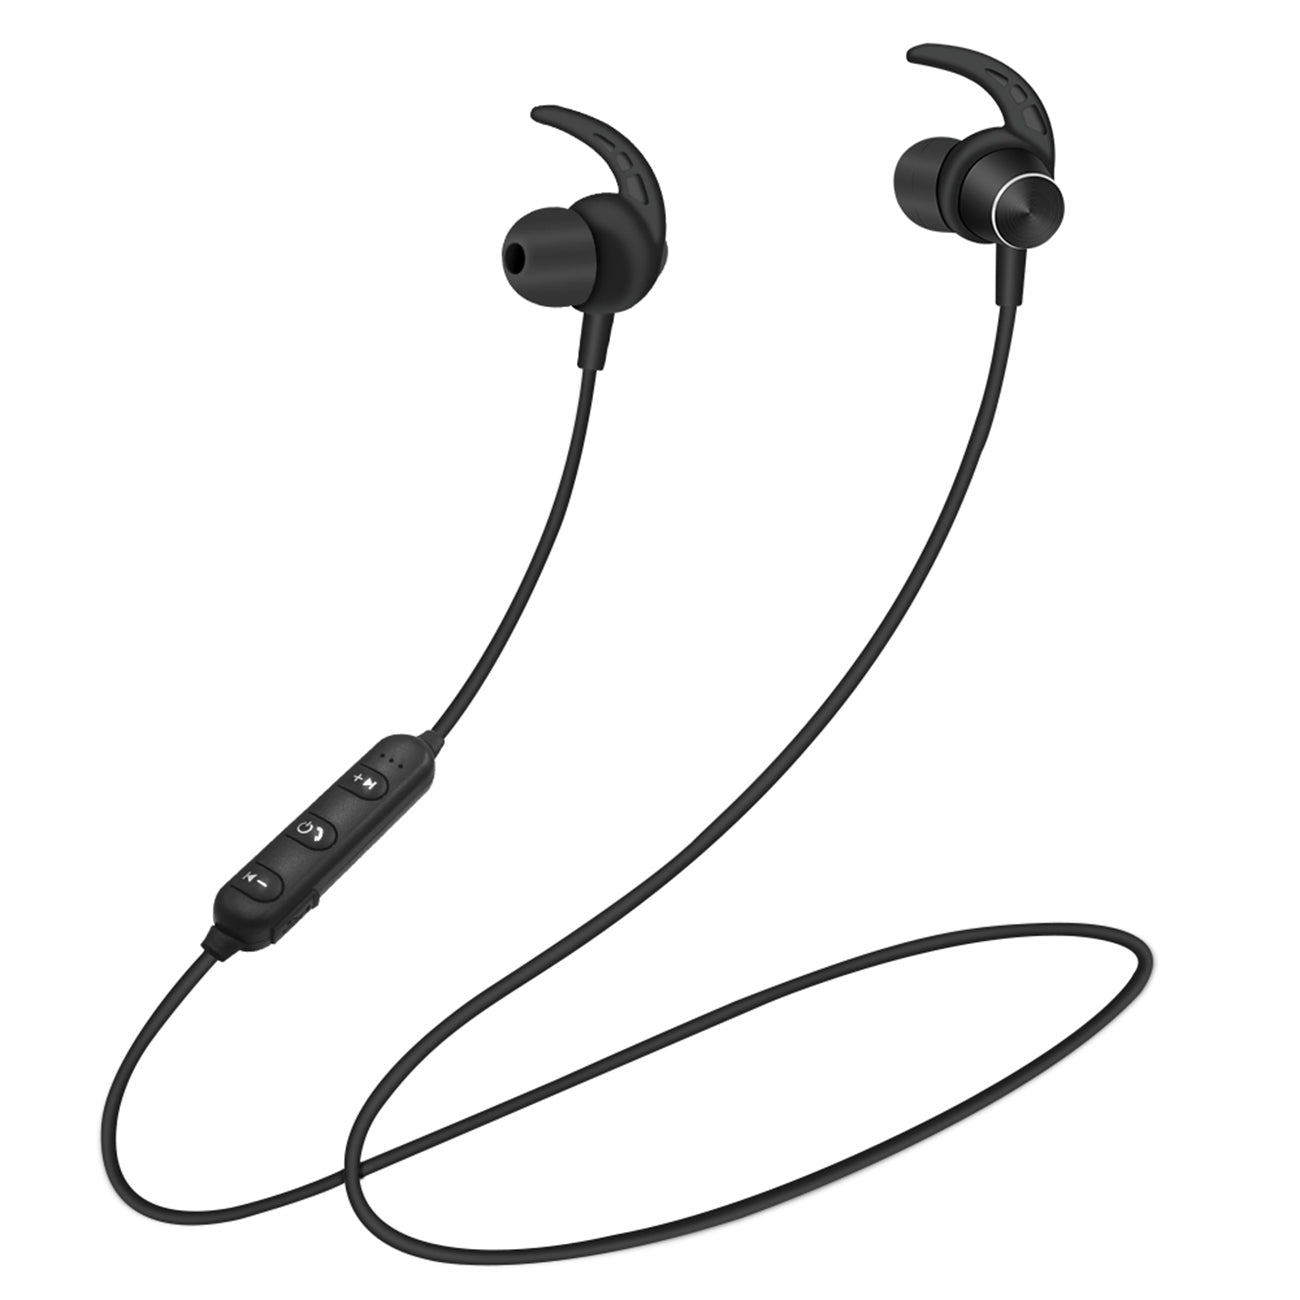 Earphone Headset Magnetic Bluetooth With Mic Black Color